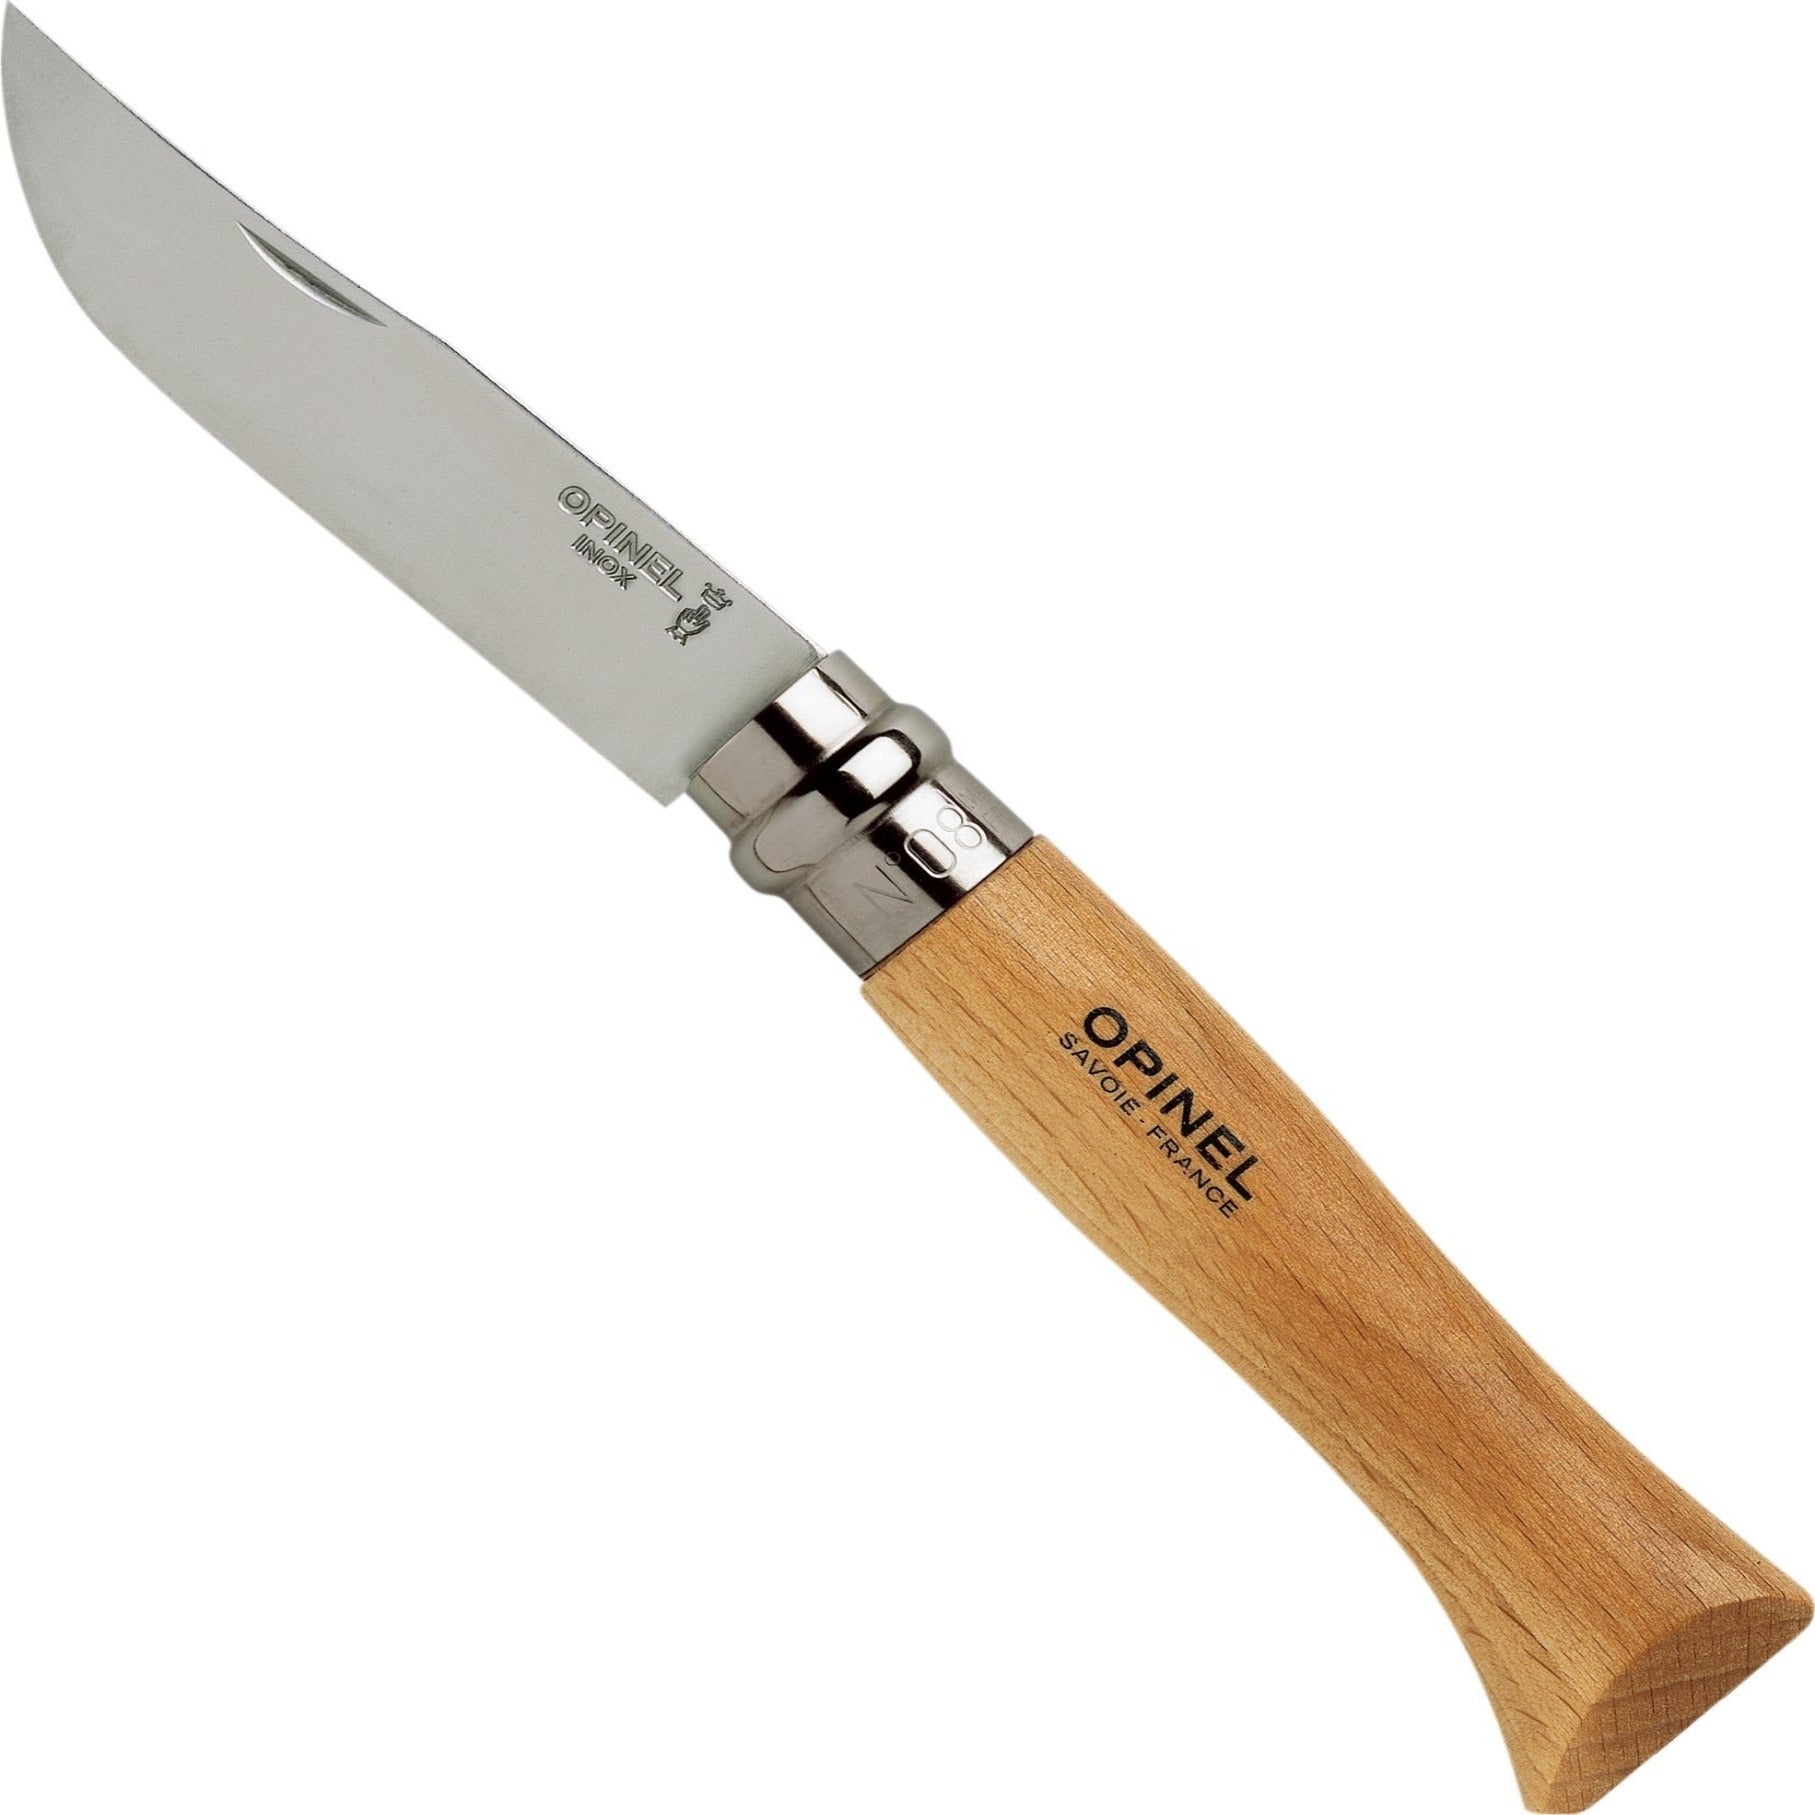 Opinel  No.08 Stainless Steel Pocket Knife - OPINEL USA